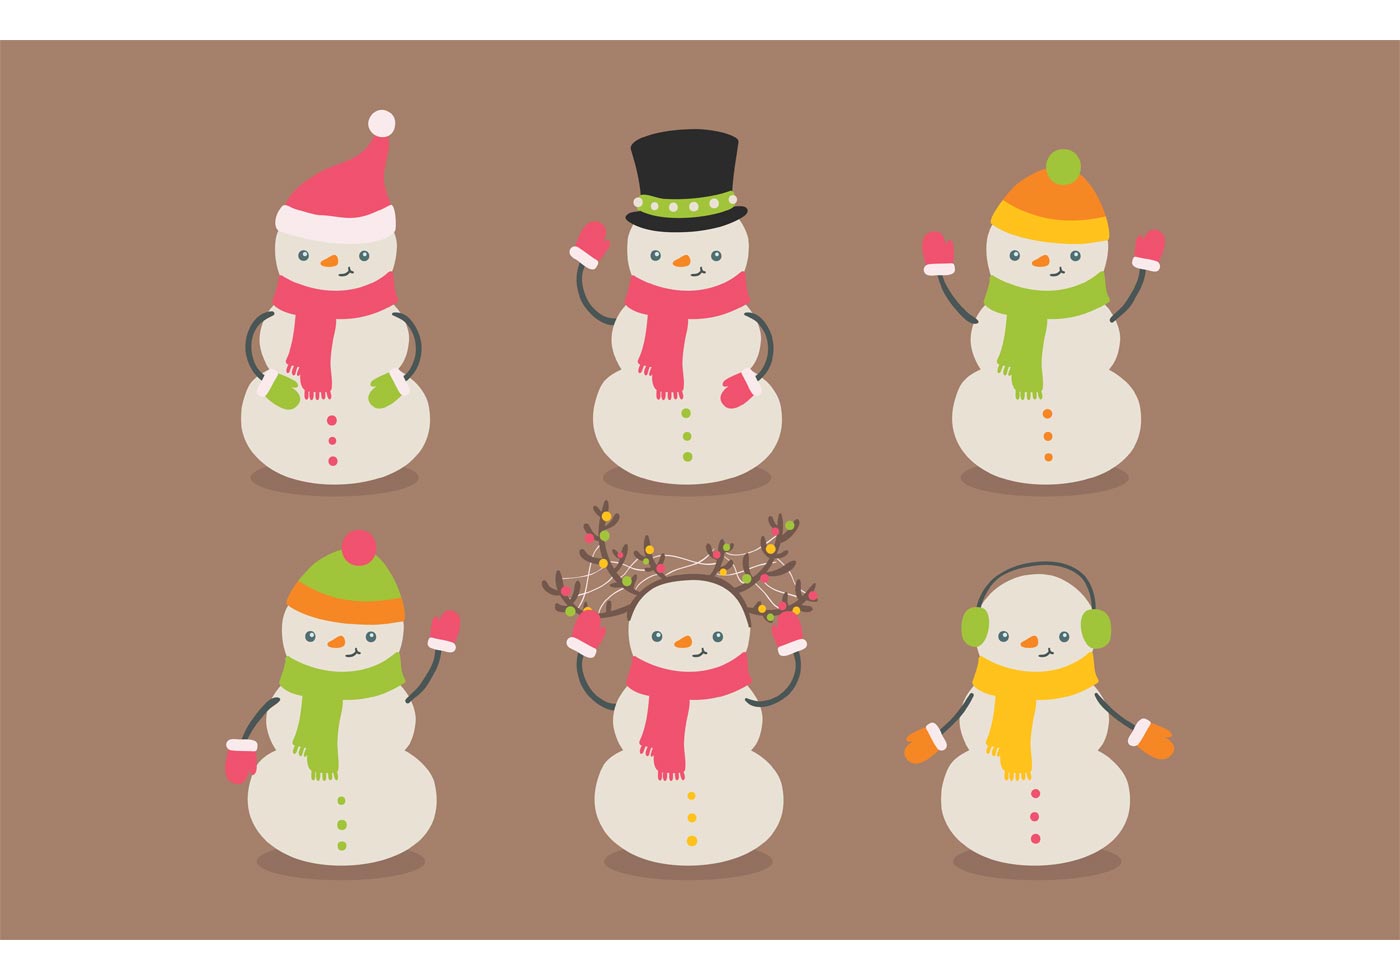 Download Free Snowman Vector Pack - Download Free Vector Art, Stock Graphics & Images